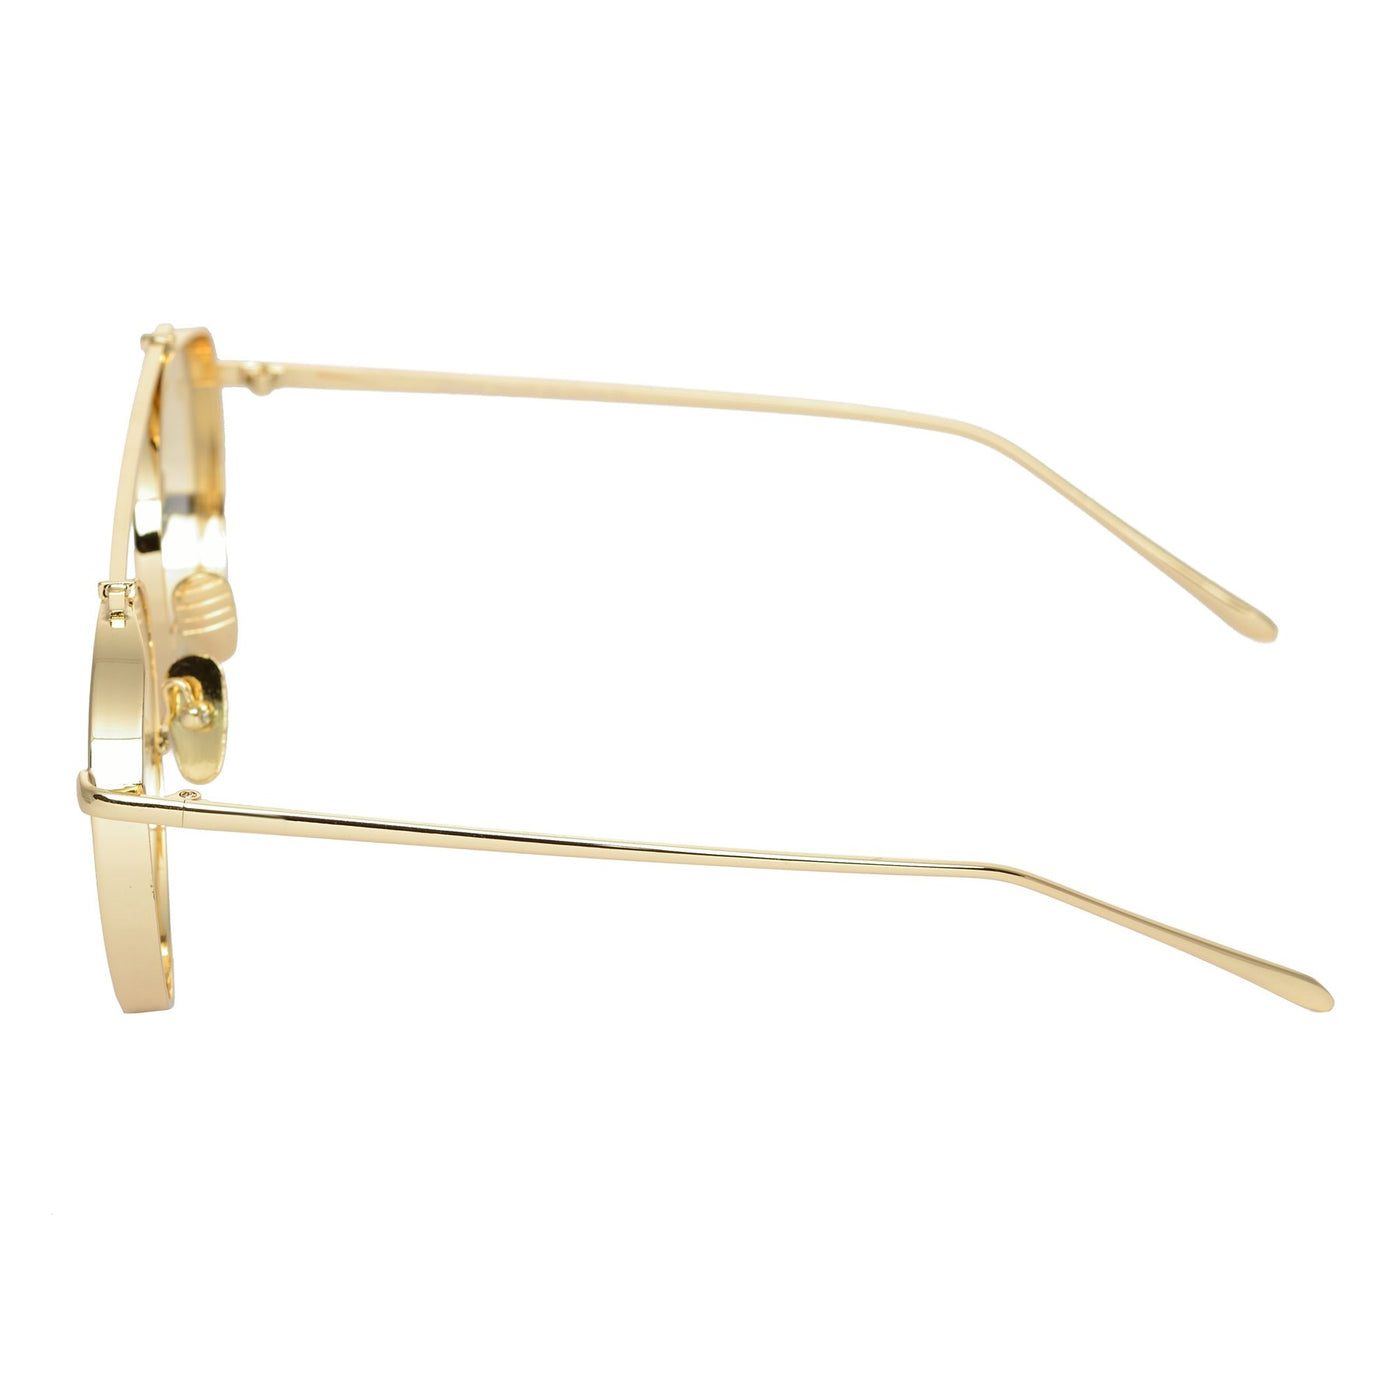 Round Gold Day Night Sunglasses For Men And Women-Unique and Classy